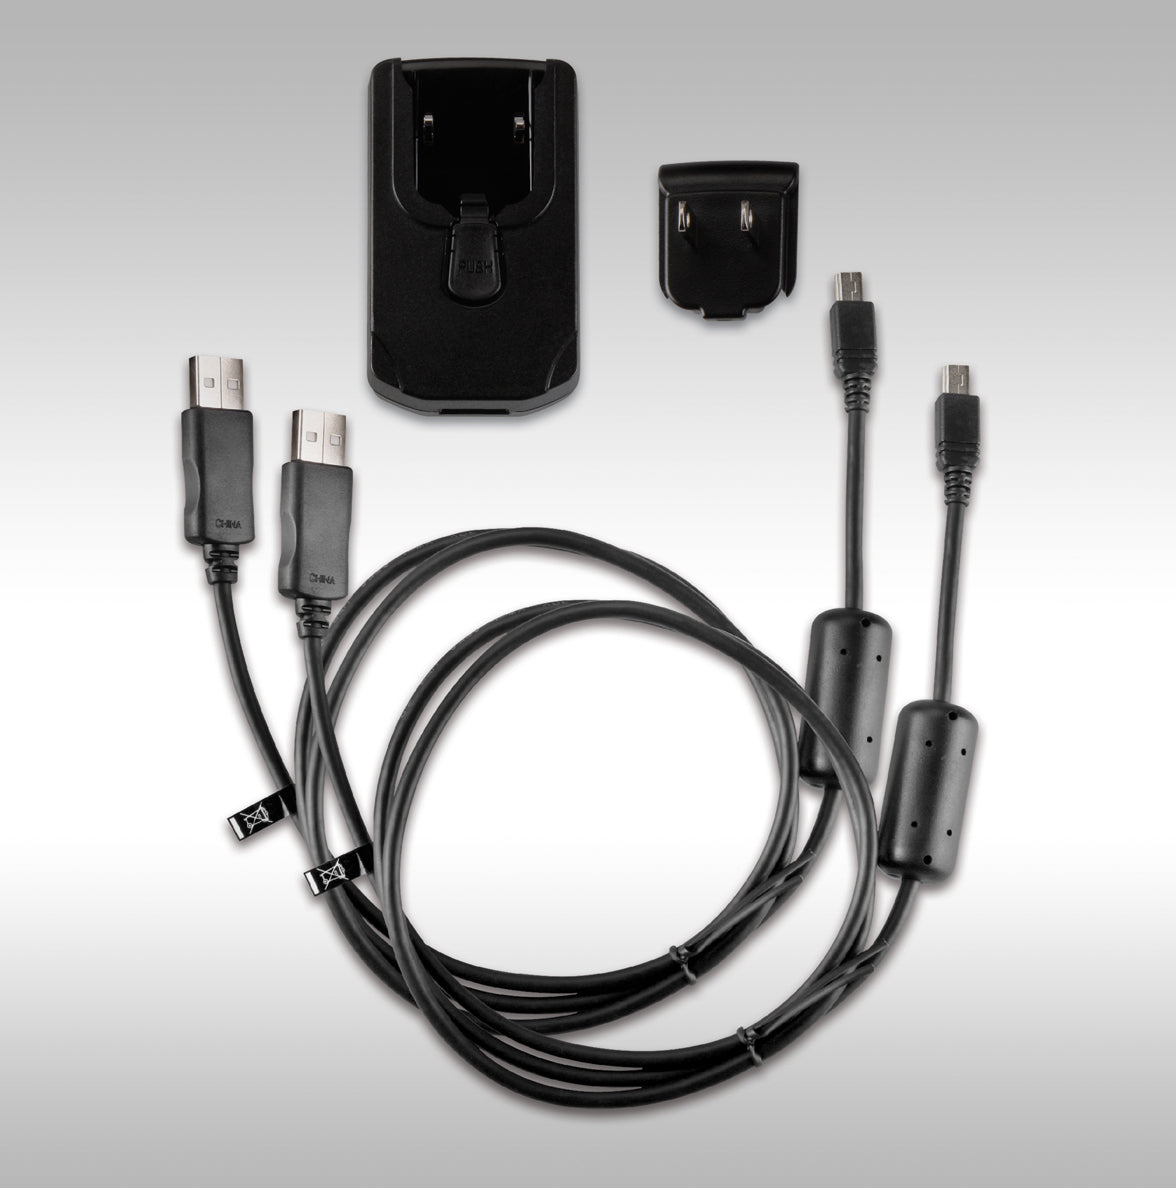 GARMIN - AC ADAPTER AND USB CABLE KIT